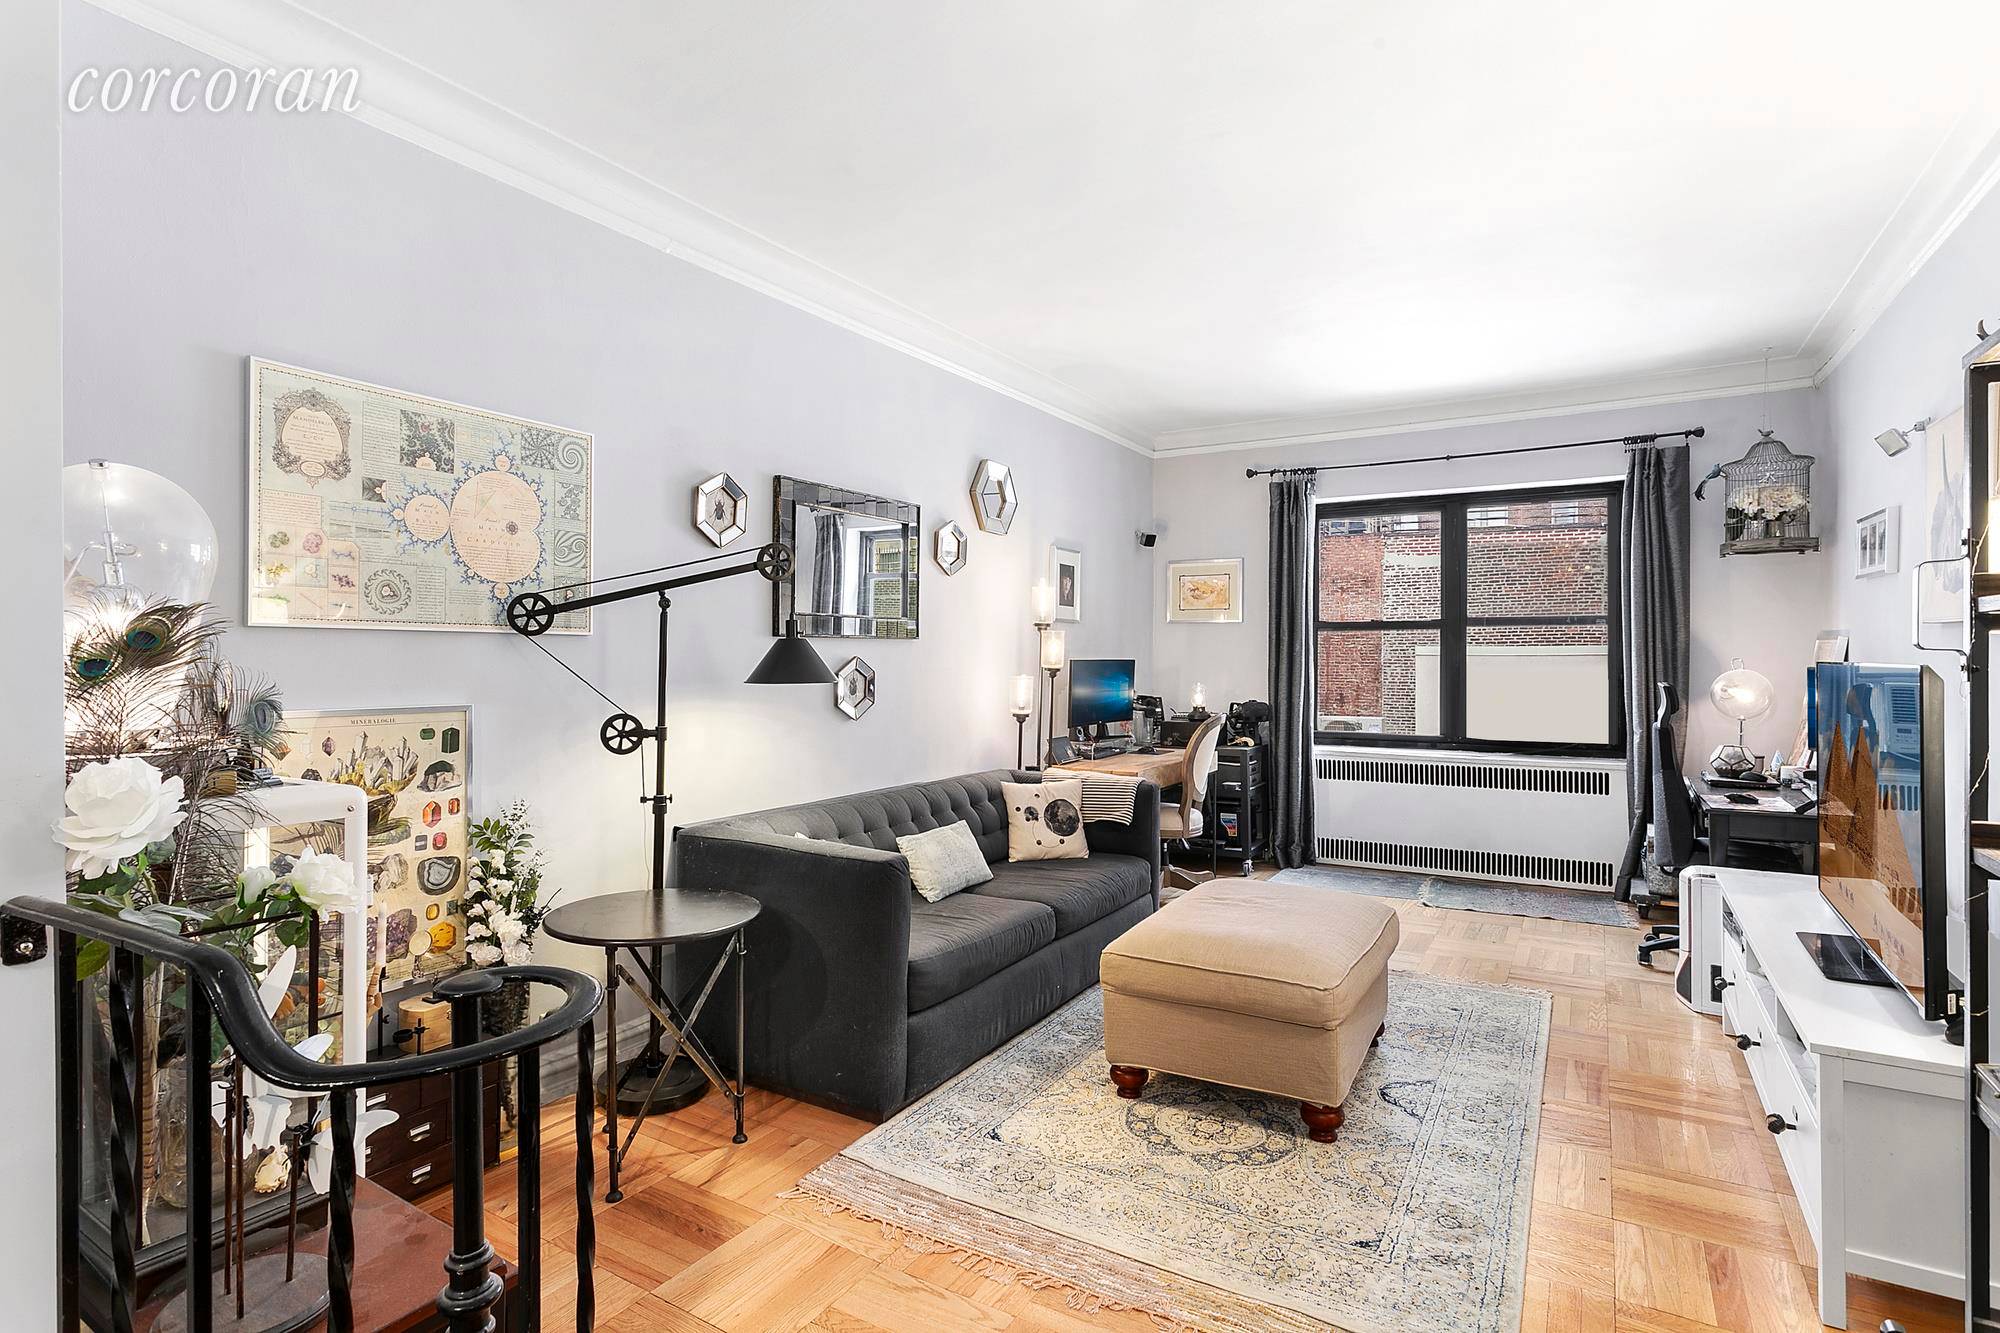 Located at 303 East 37th Street, an intimate cooperative building, this sprawling 800 s f one bedroom and one bathroom home is bursting with pre war charm.